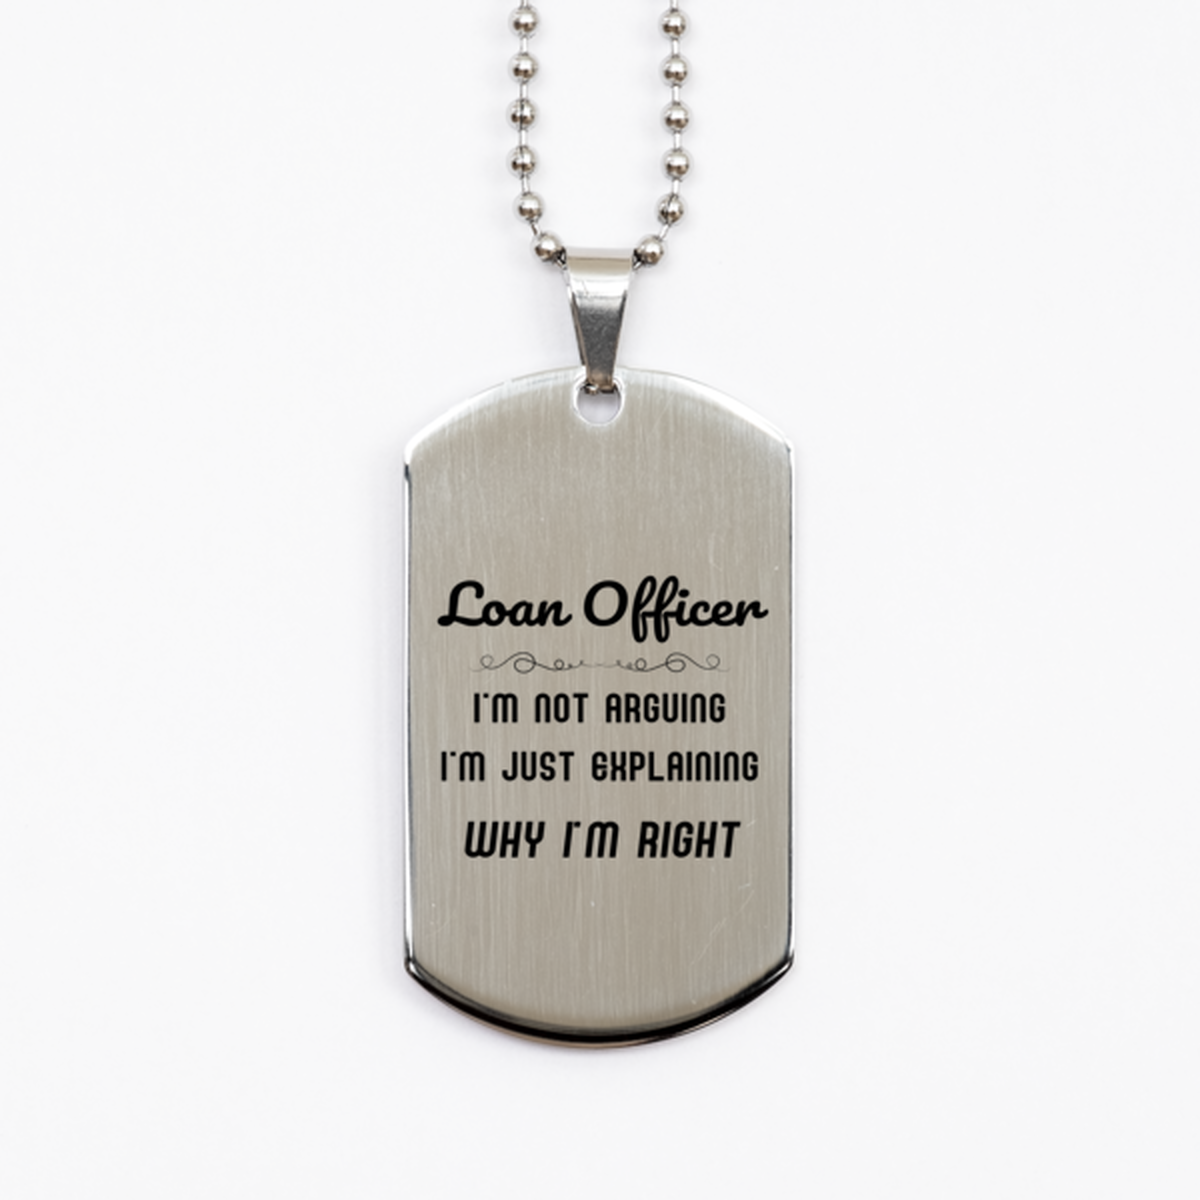 Loan Officer I'm not Arguing. I'm Just Explaining Why I'm RIGHT Silver Dog Tag, Funny Saying Quote Loan Officer Gifts For Loan Officer Graduation Birthday Christmas Gifts for Men Women Coworker